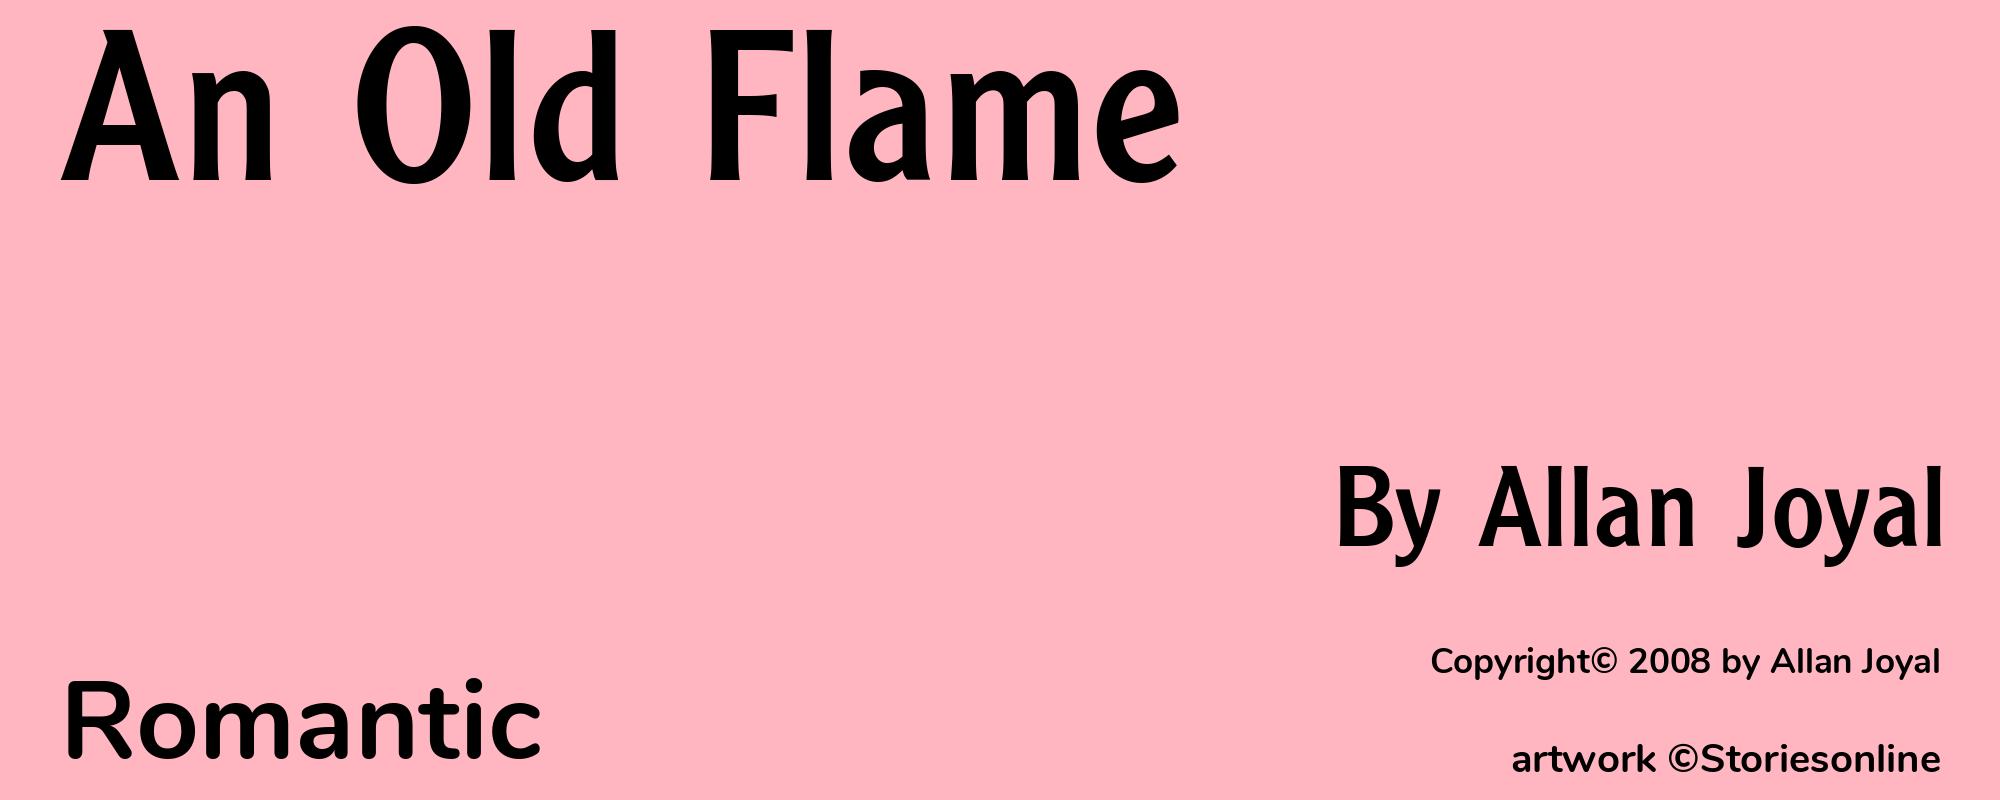 An Old Flame - Cover